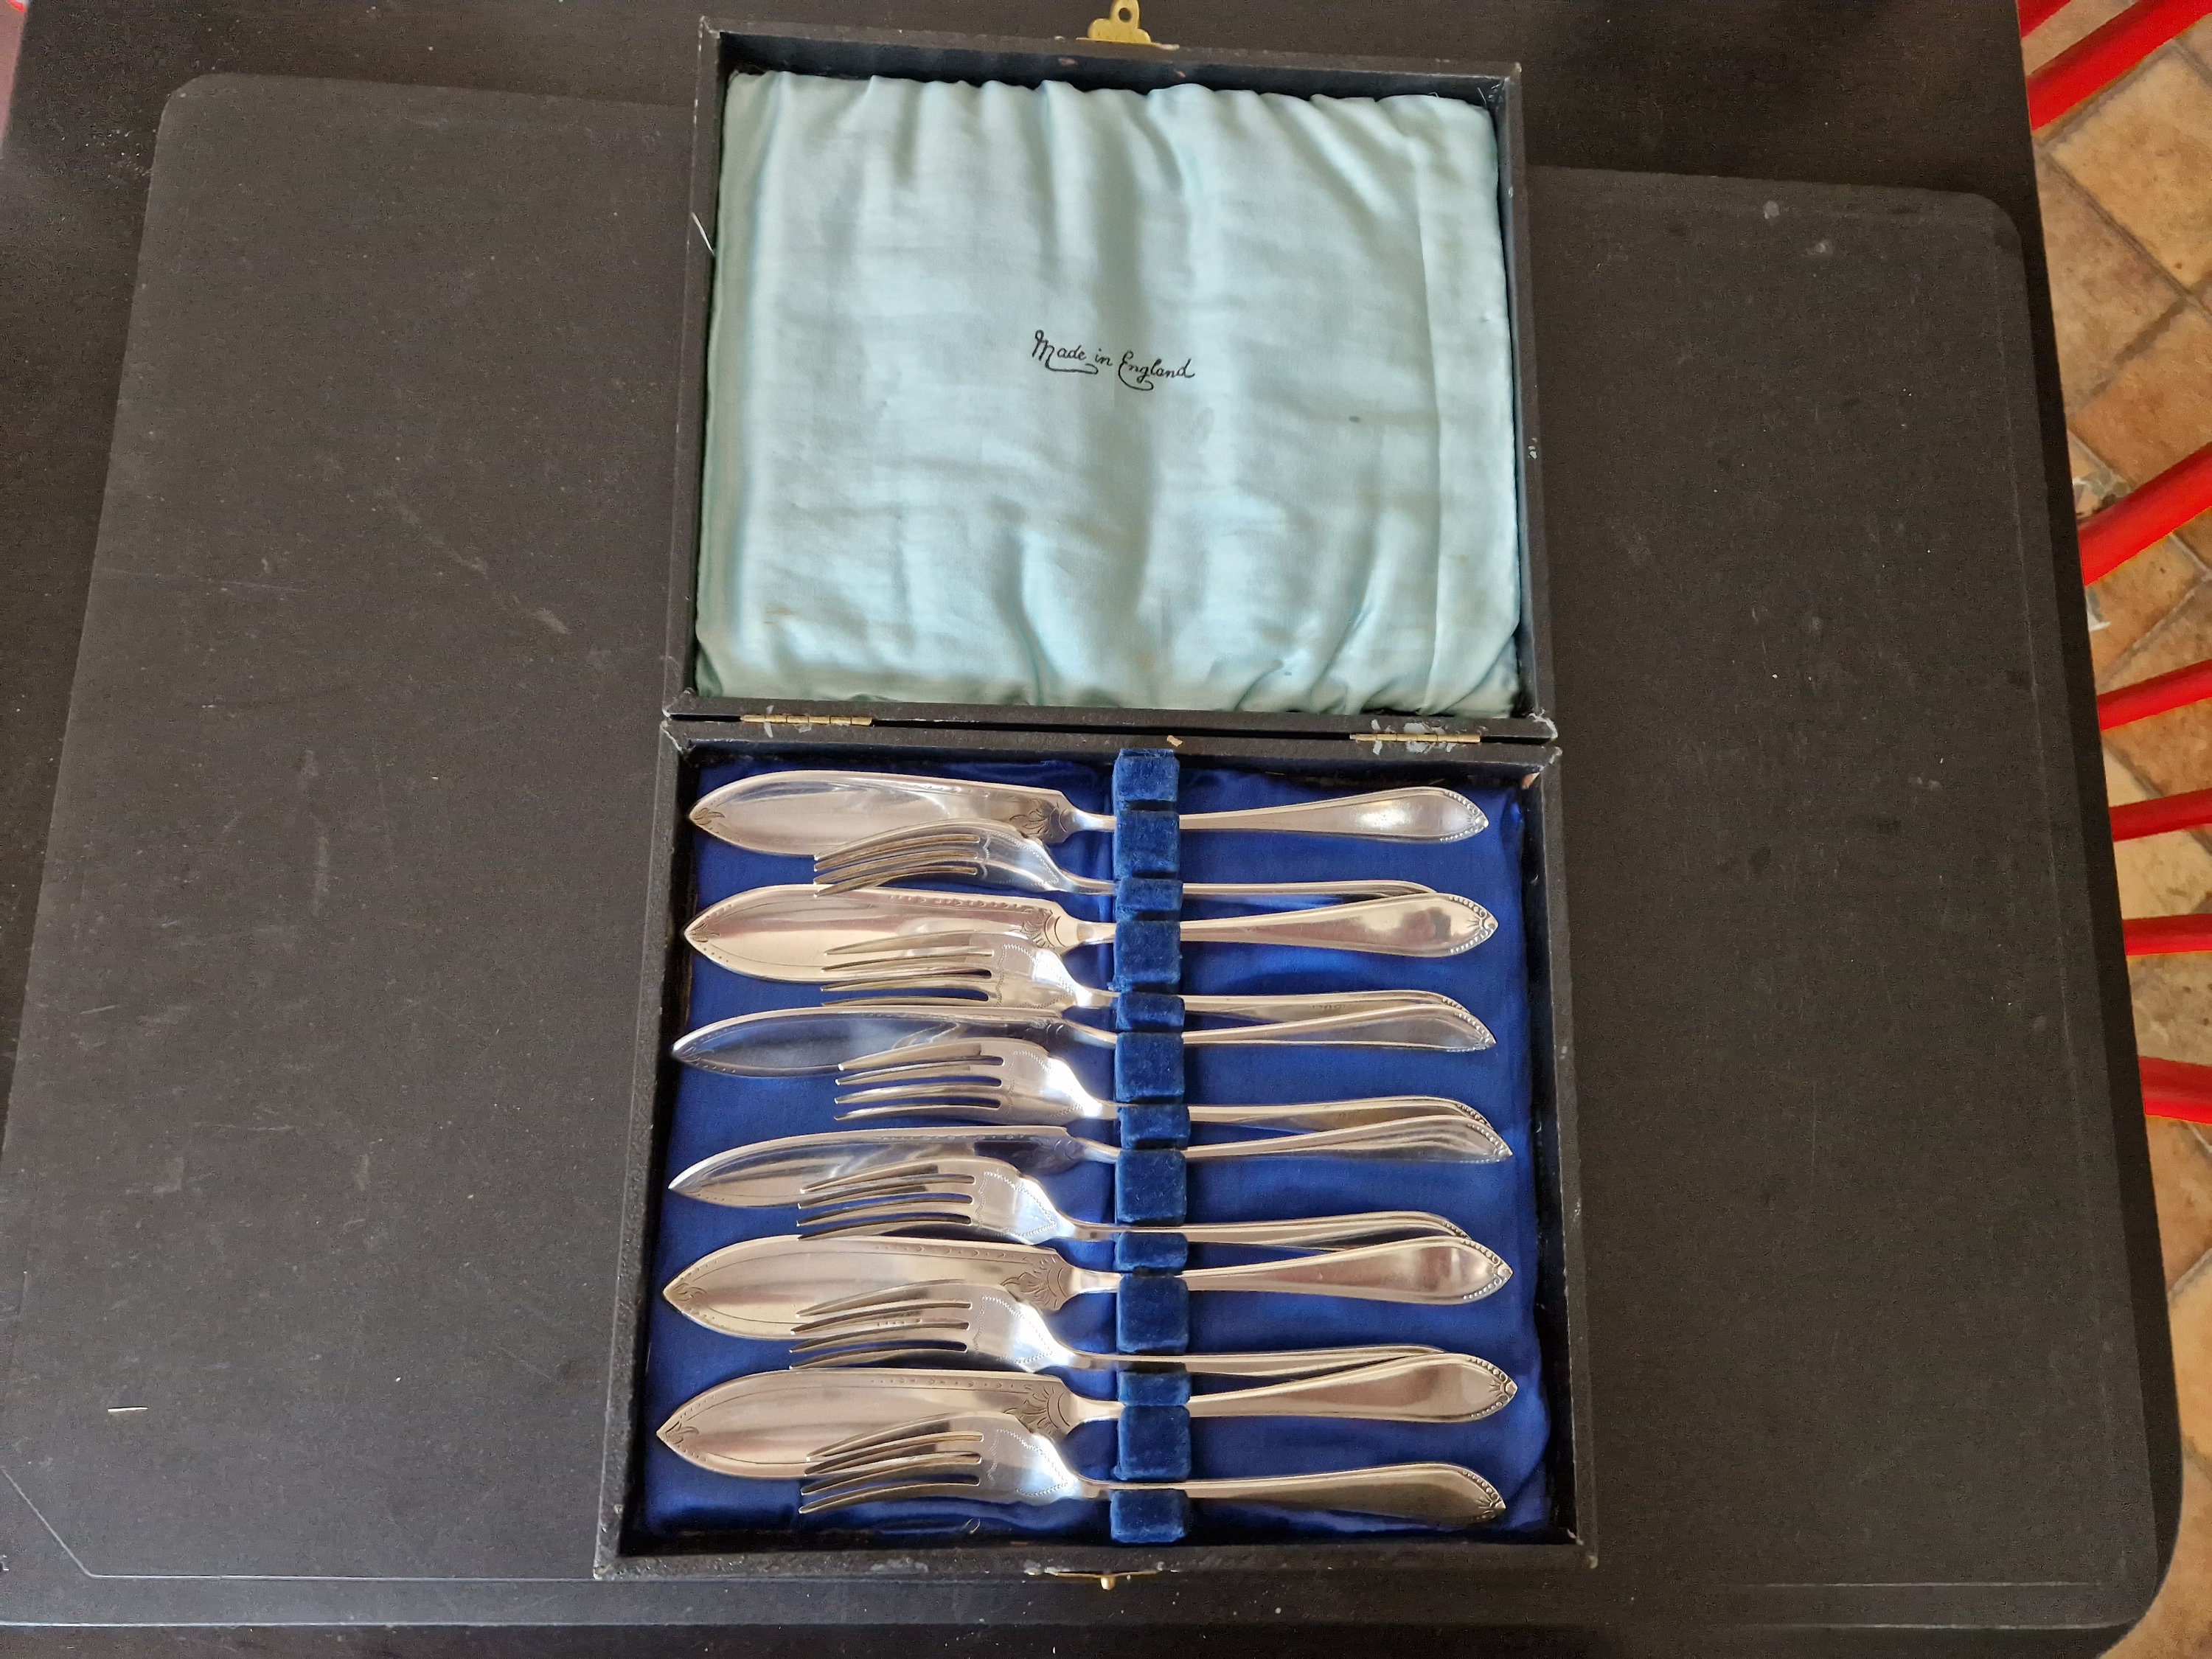 Vintage Boxed Fish Fork and Knife Set, Rustless Nickel, 12 Piece 